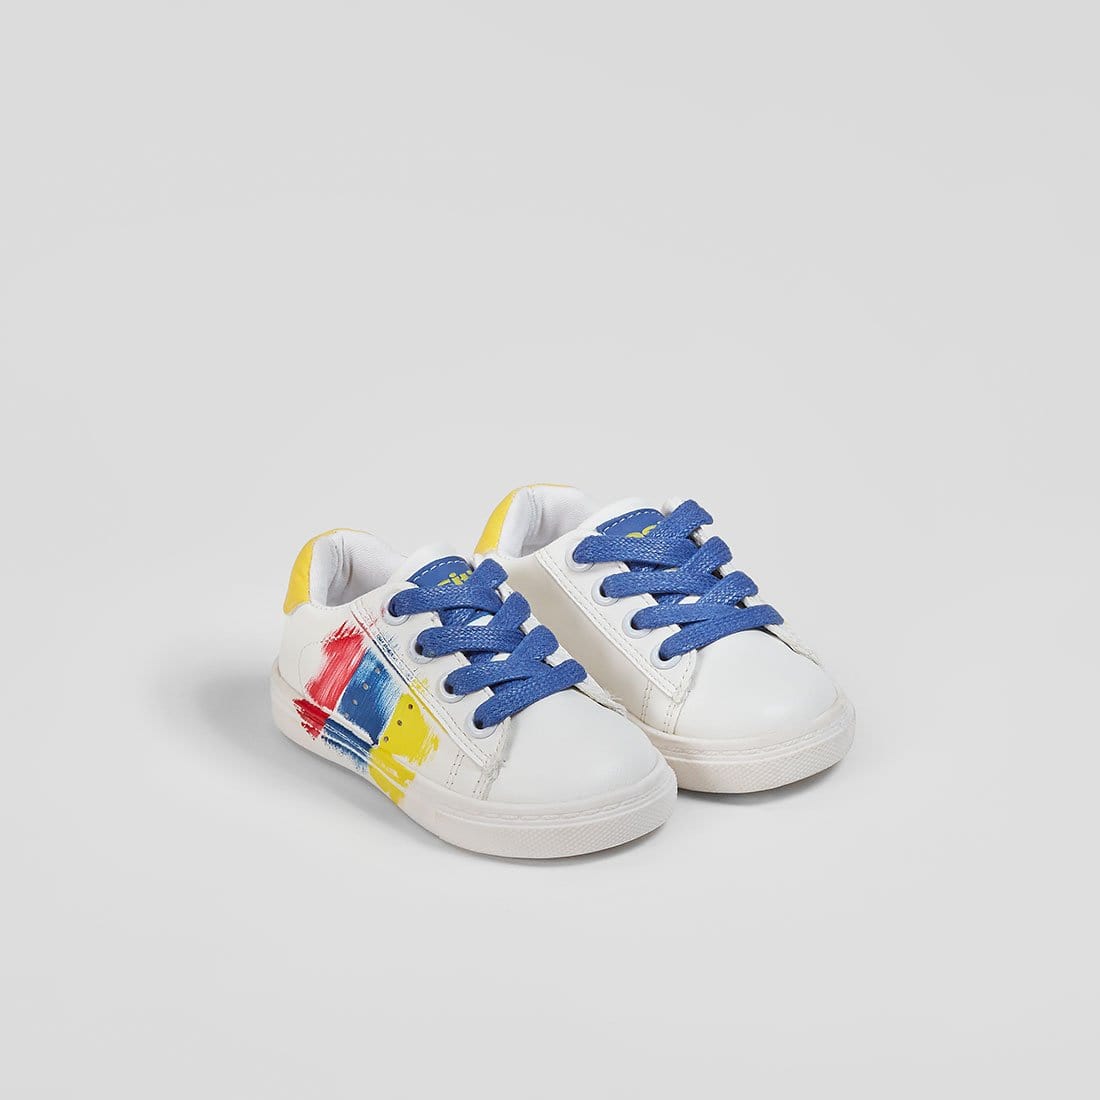 OSITO Shoes Baby's Hand-painted Sneakers